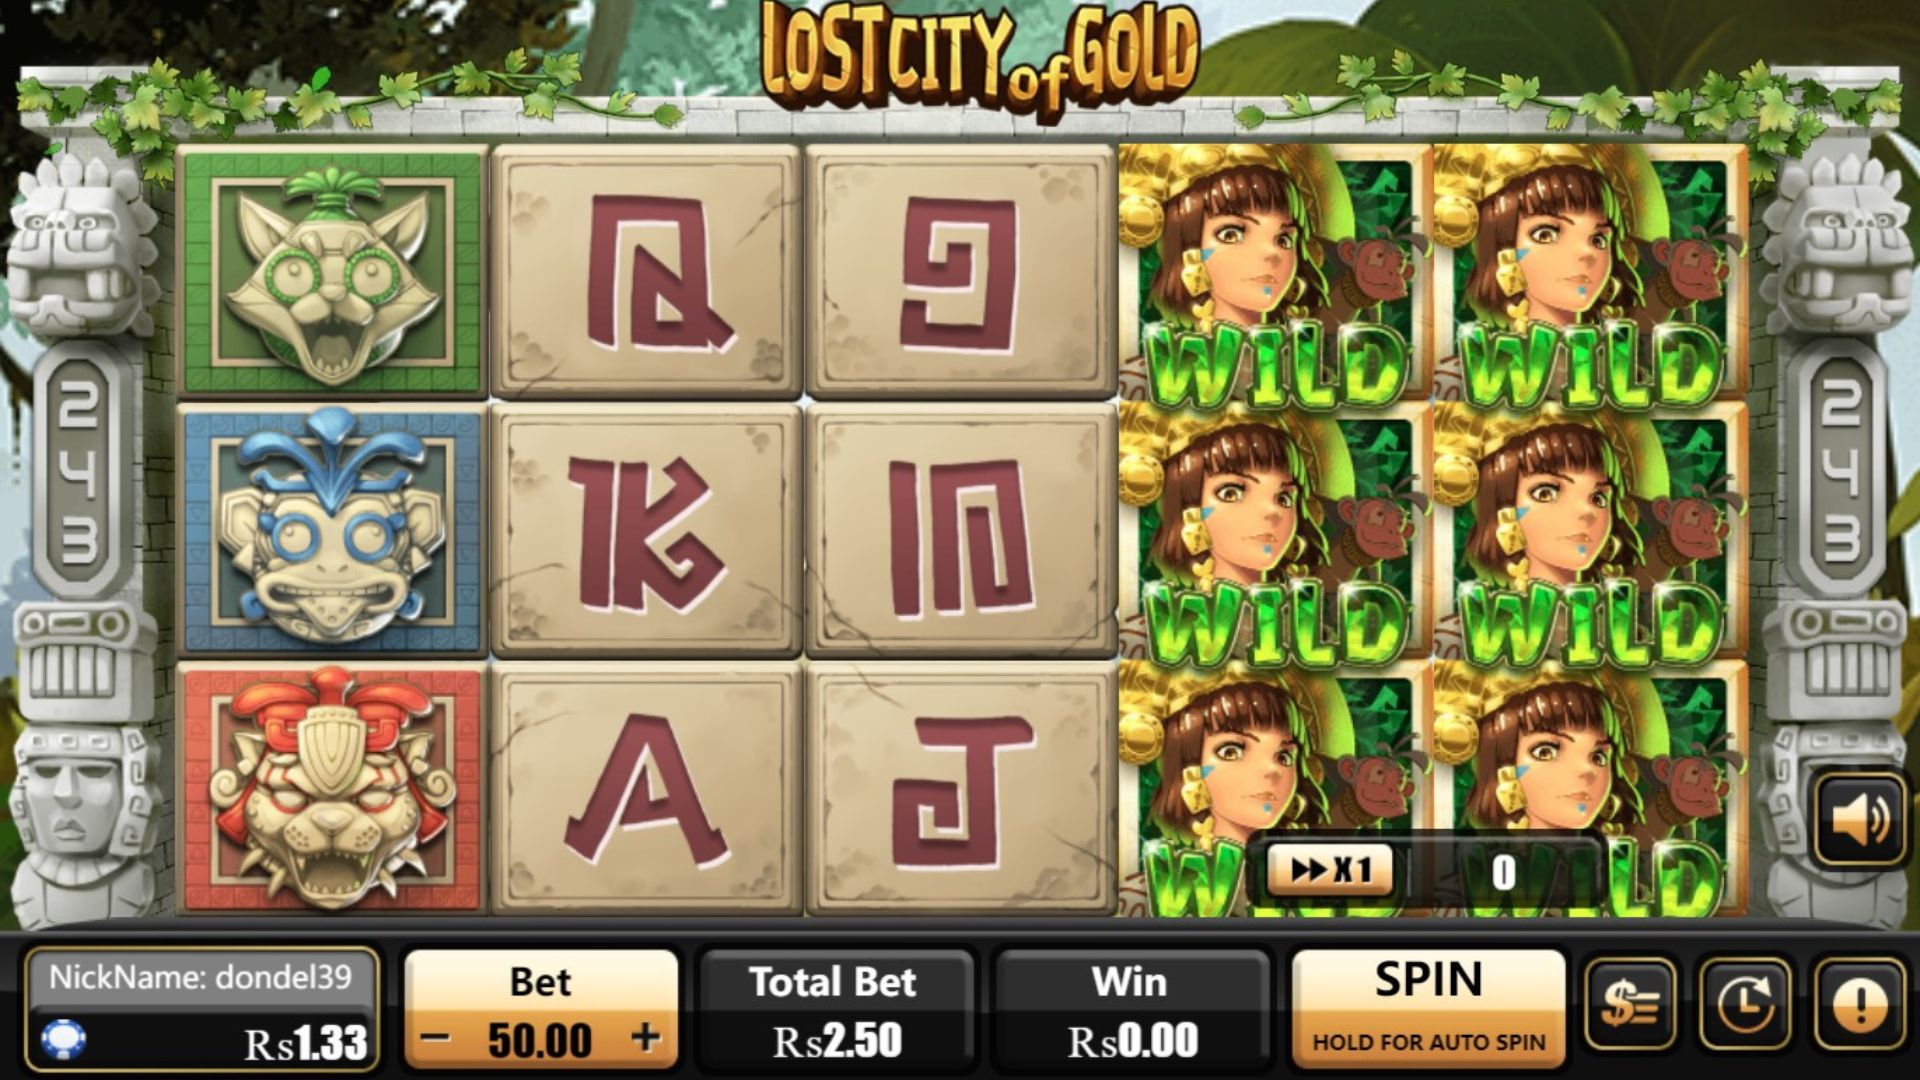 gameplay slot lost city of gold